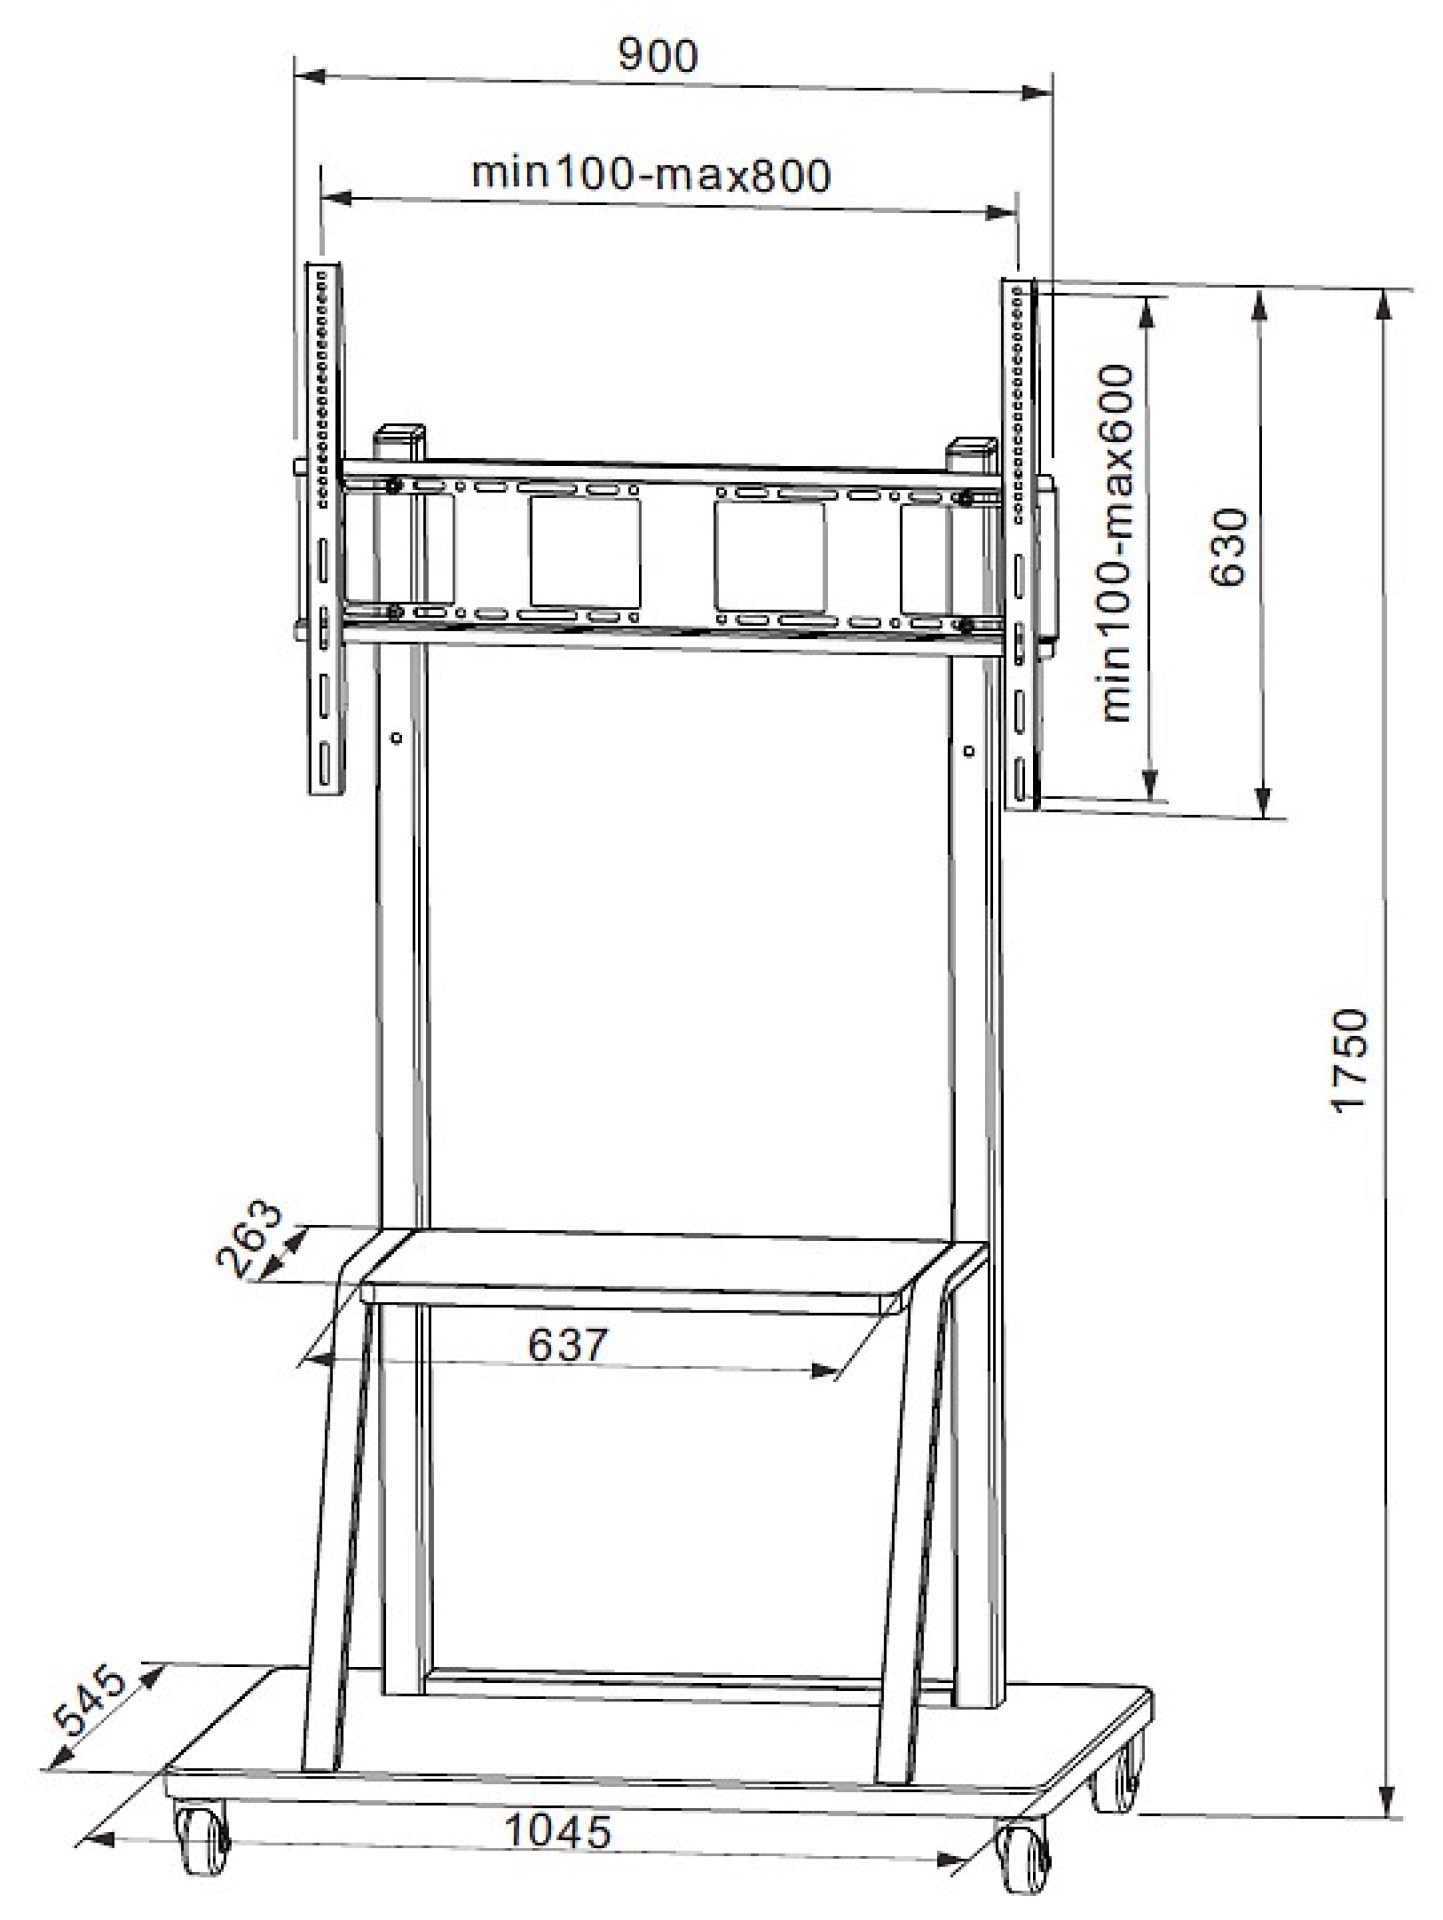 Trolley floor support for LCD LED TV 55-100", with shelf